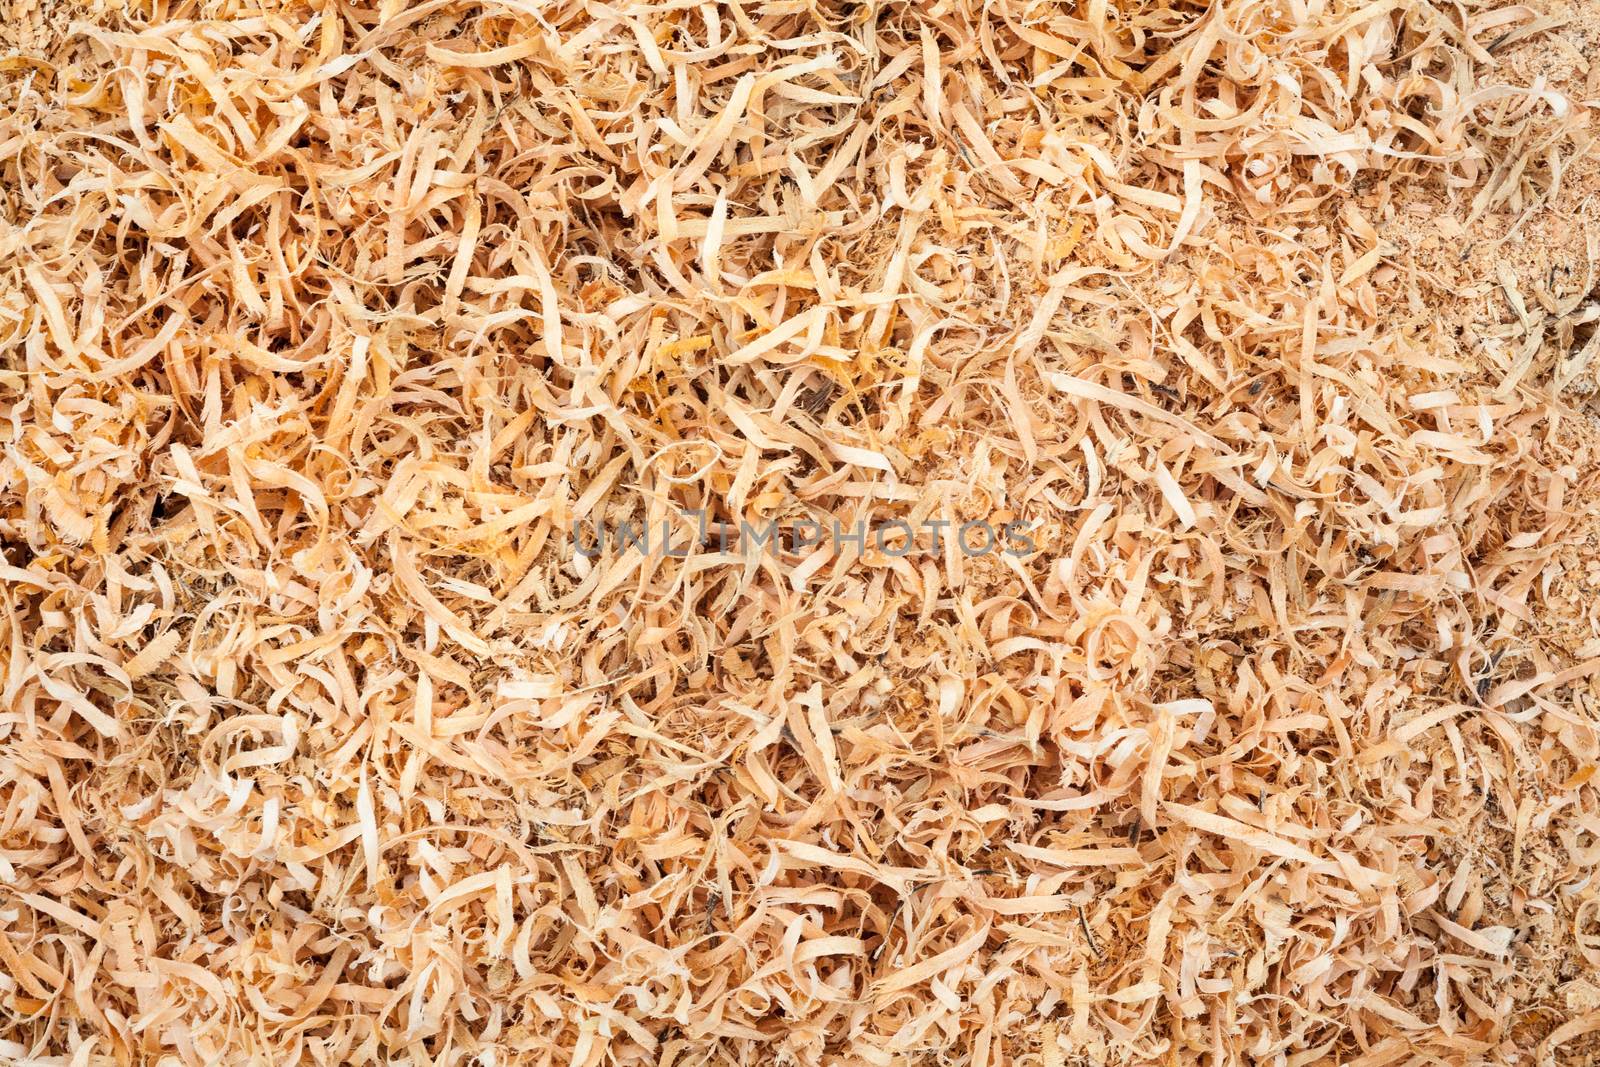 Wood sawdust by rootstocks